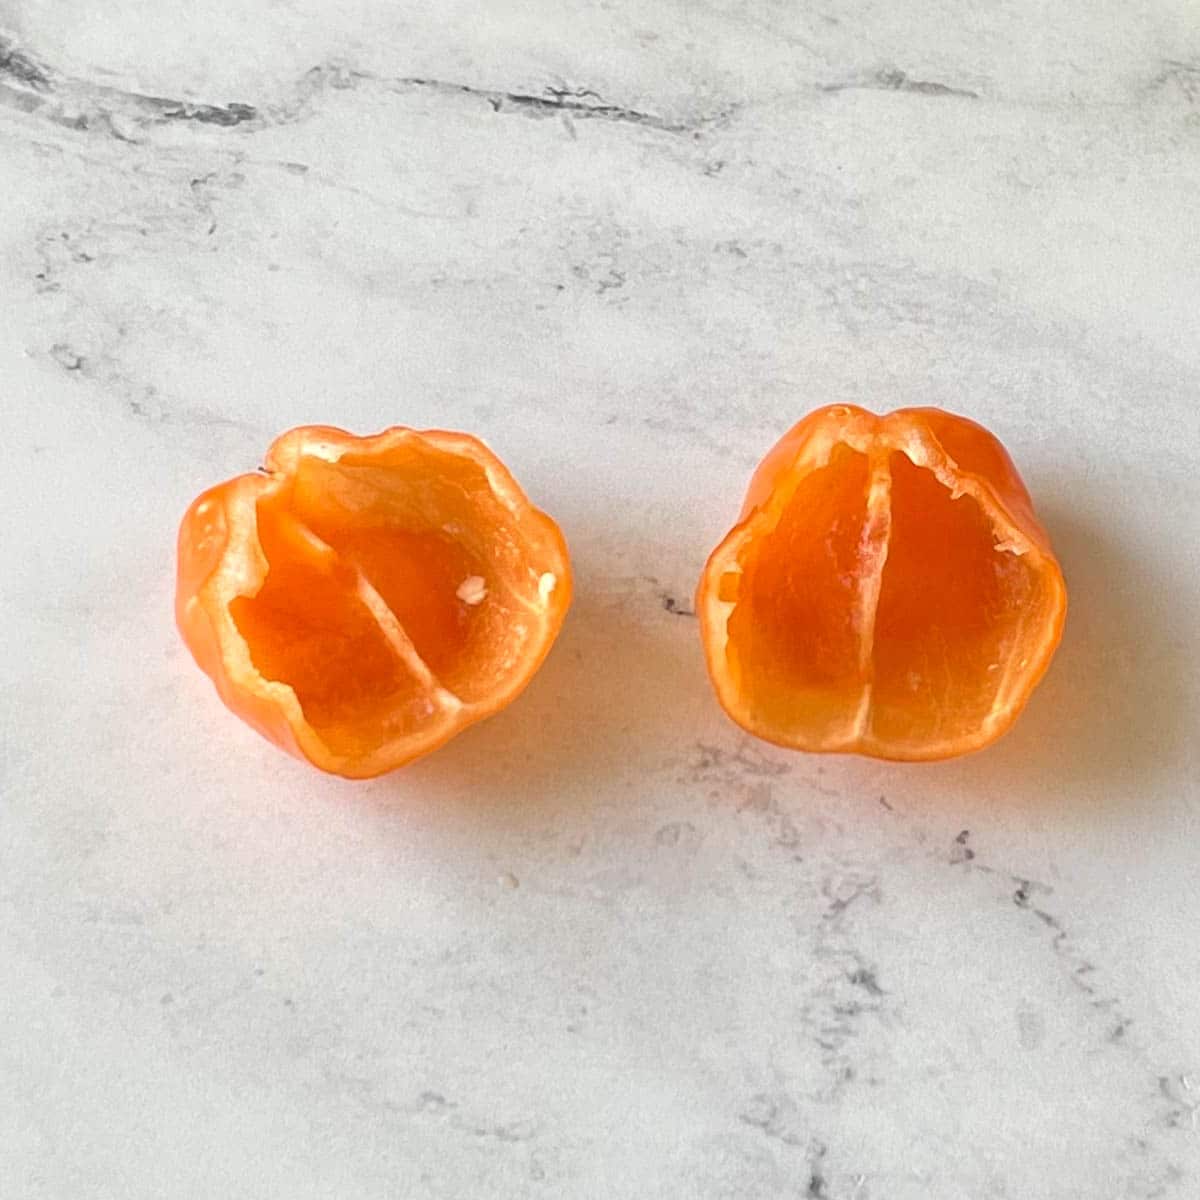 A deseeded and deveined habanero pepper sits on a white marble counter.